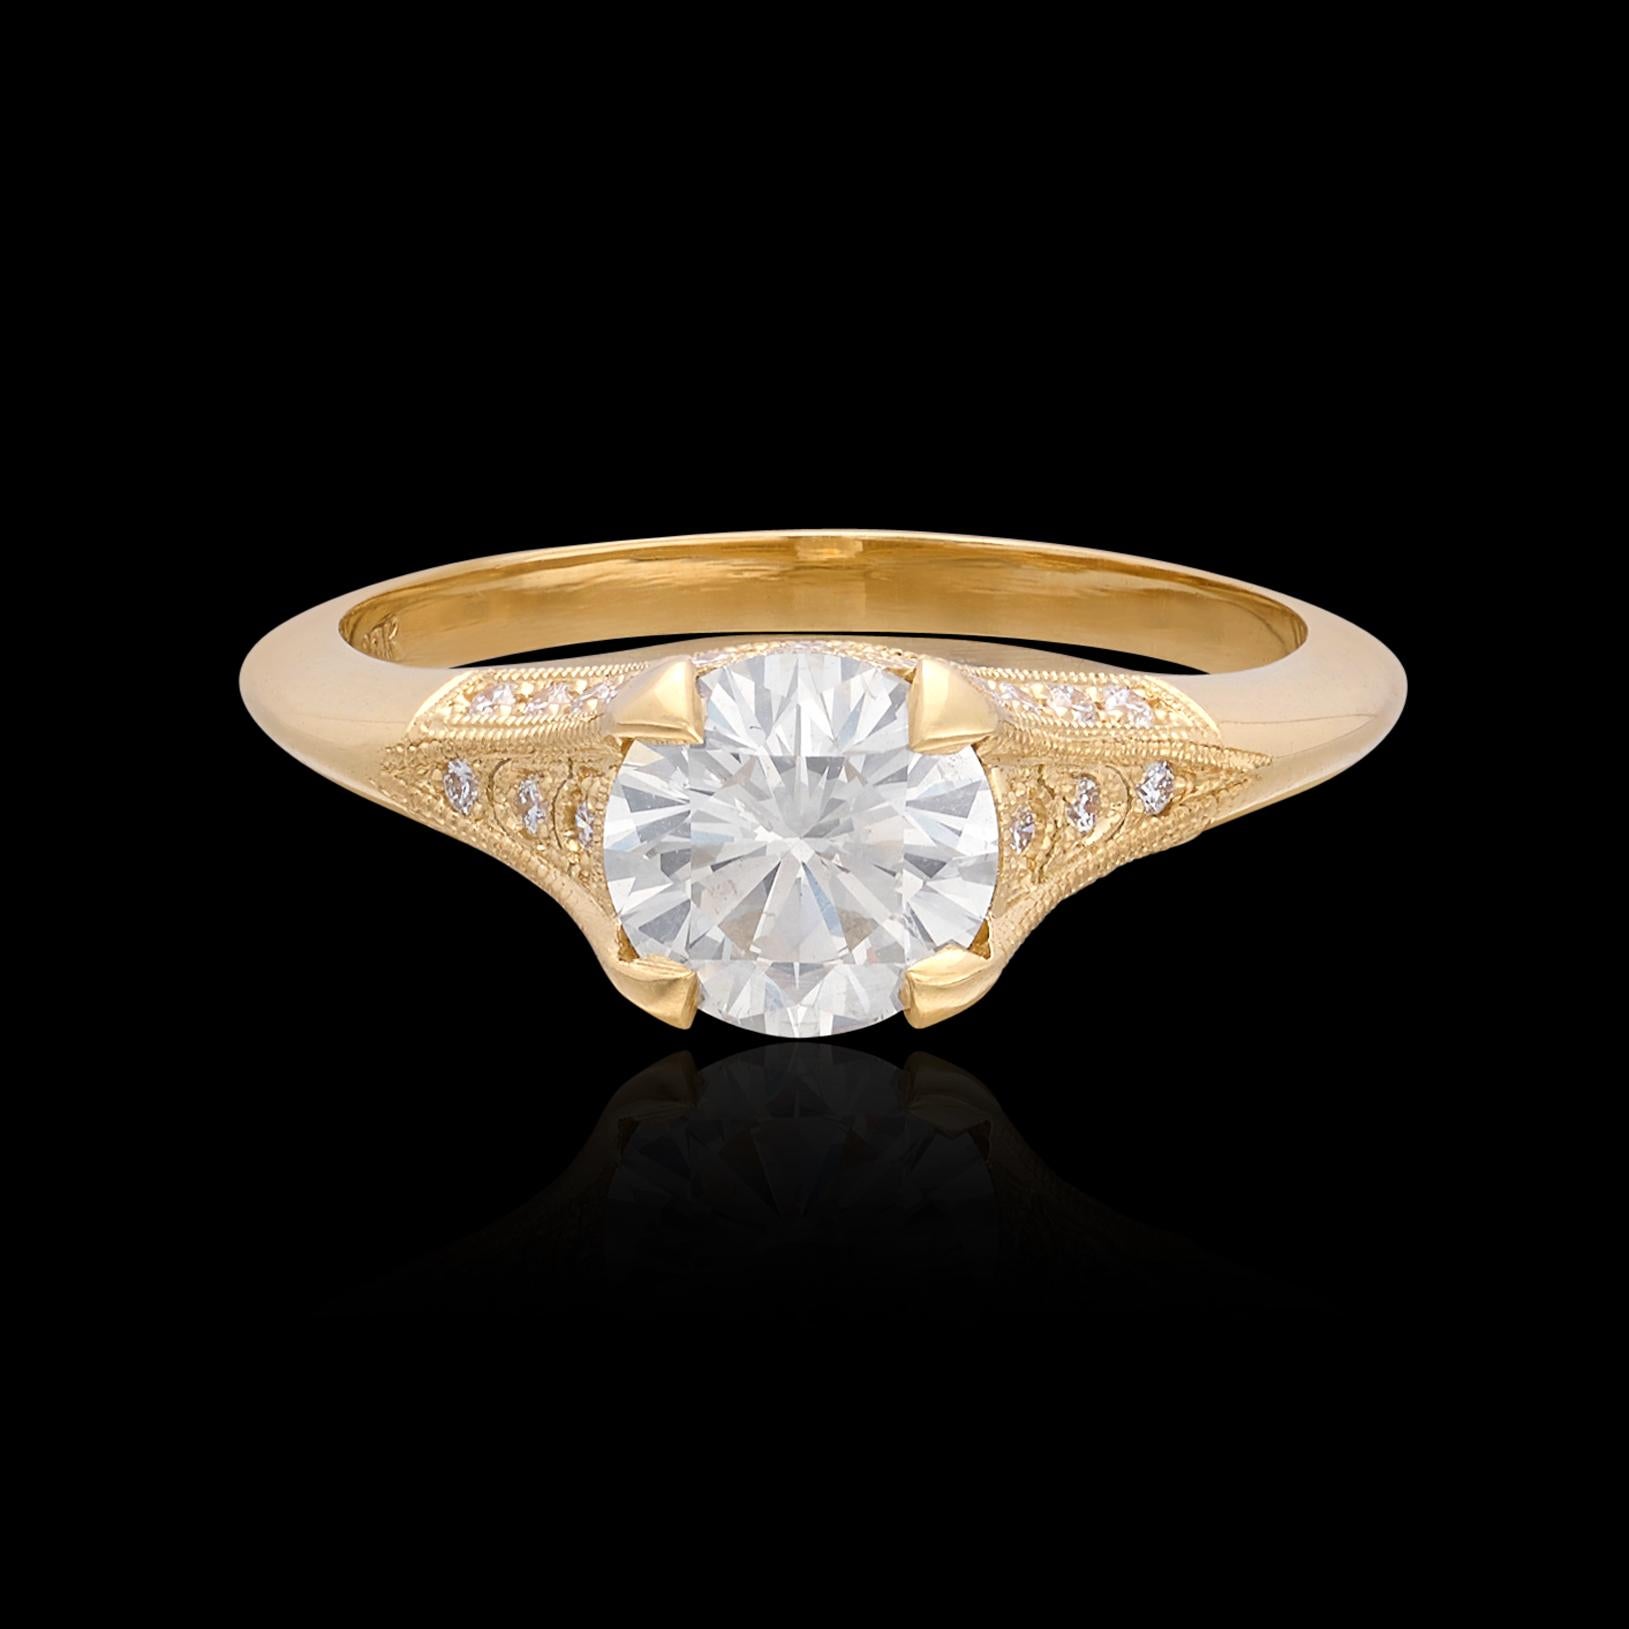 Inspired by Art Deco design, the 18k yellow gold engagement ring features a round brilliant-cut diamond weighing 1.08 carats (+/- H/SI1), set in a delicately pierced mounting set with 34 round brilliant-cut diamonds, for a total ring weight of 1.31